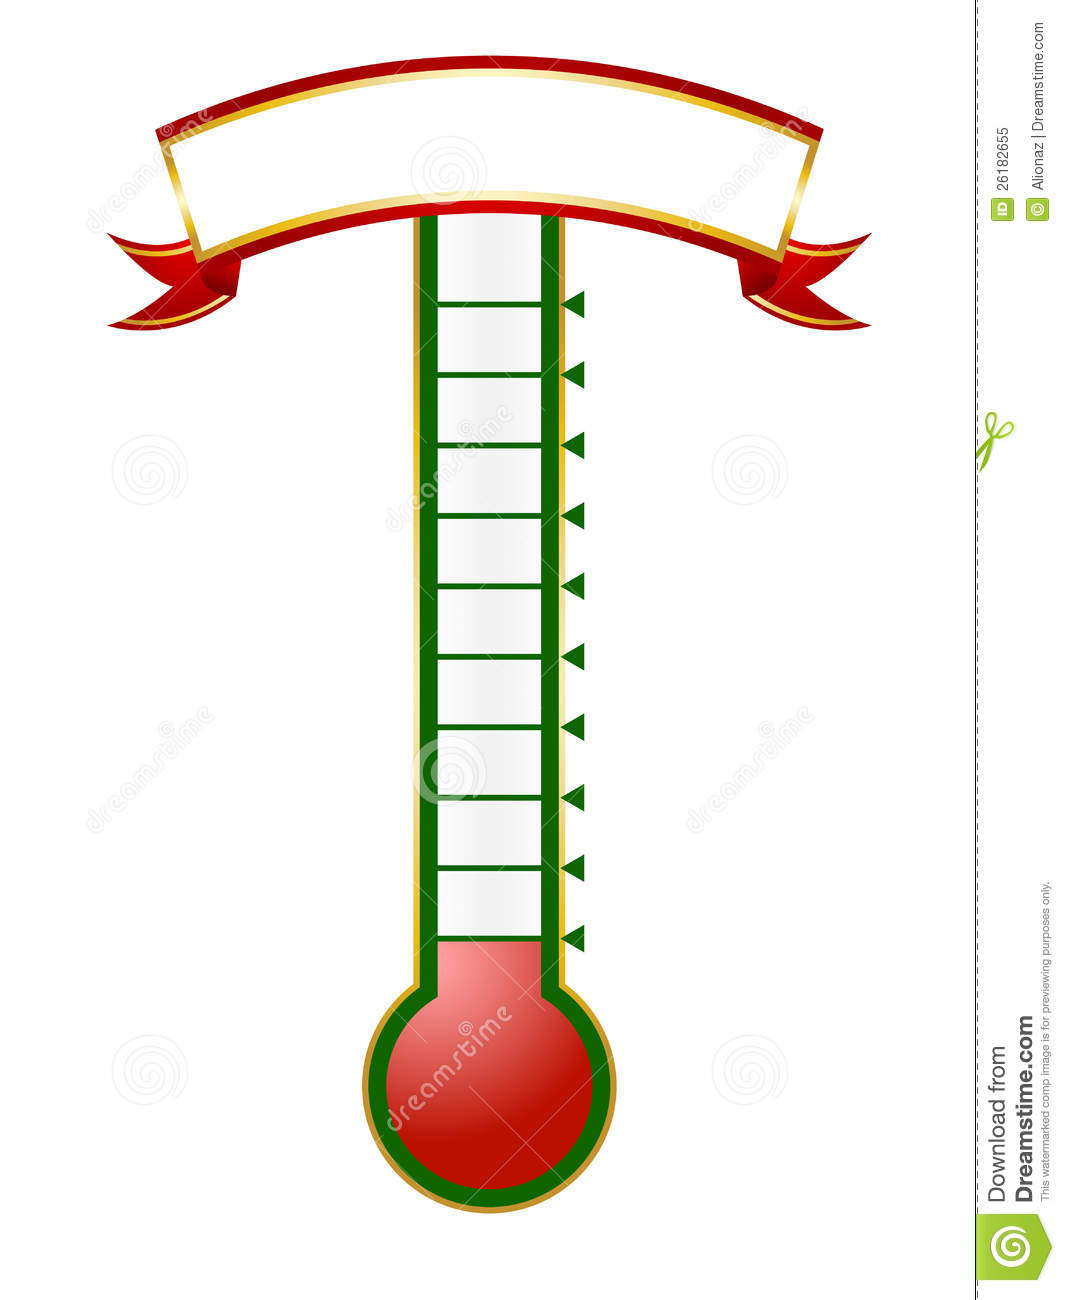 Fundraising Goal Thermometer Template